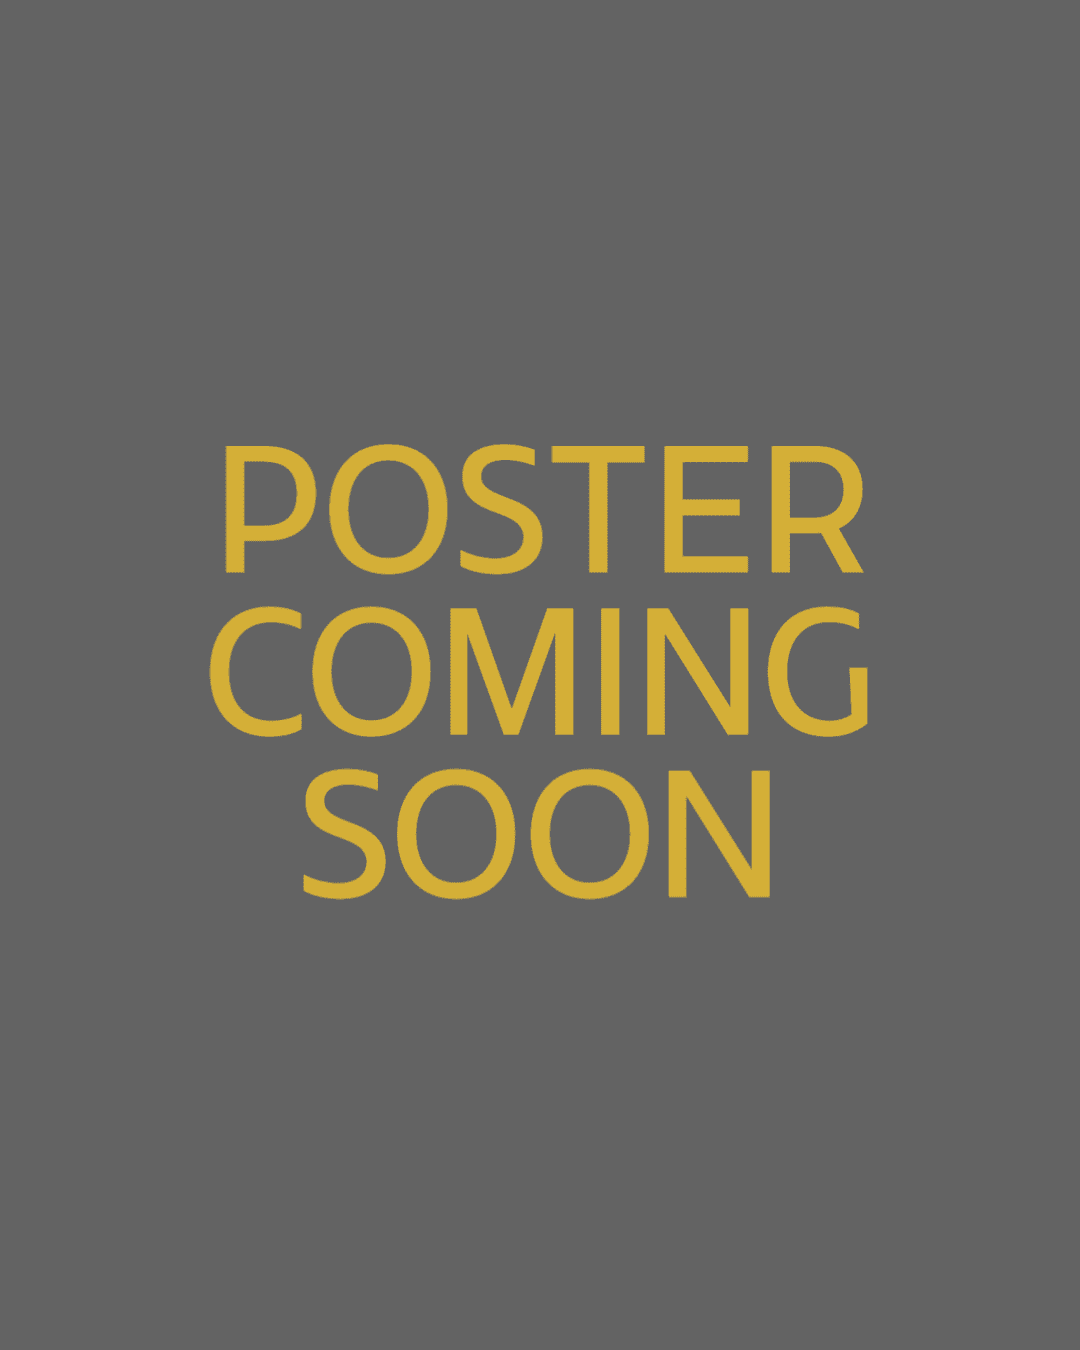 Poster Coming Soon!